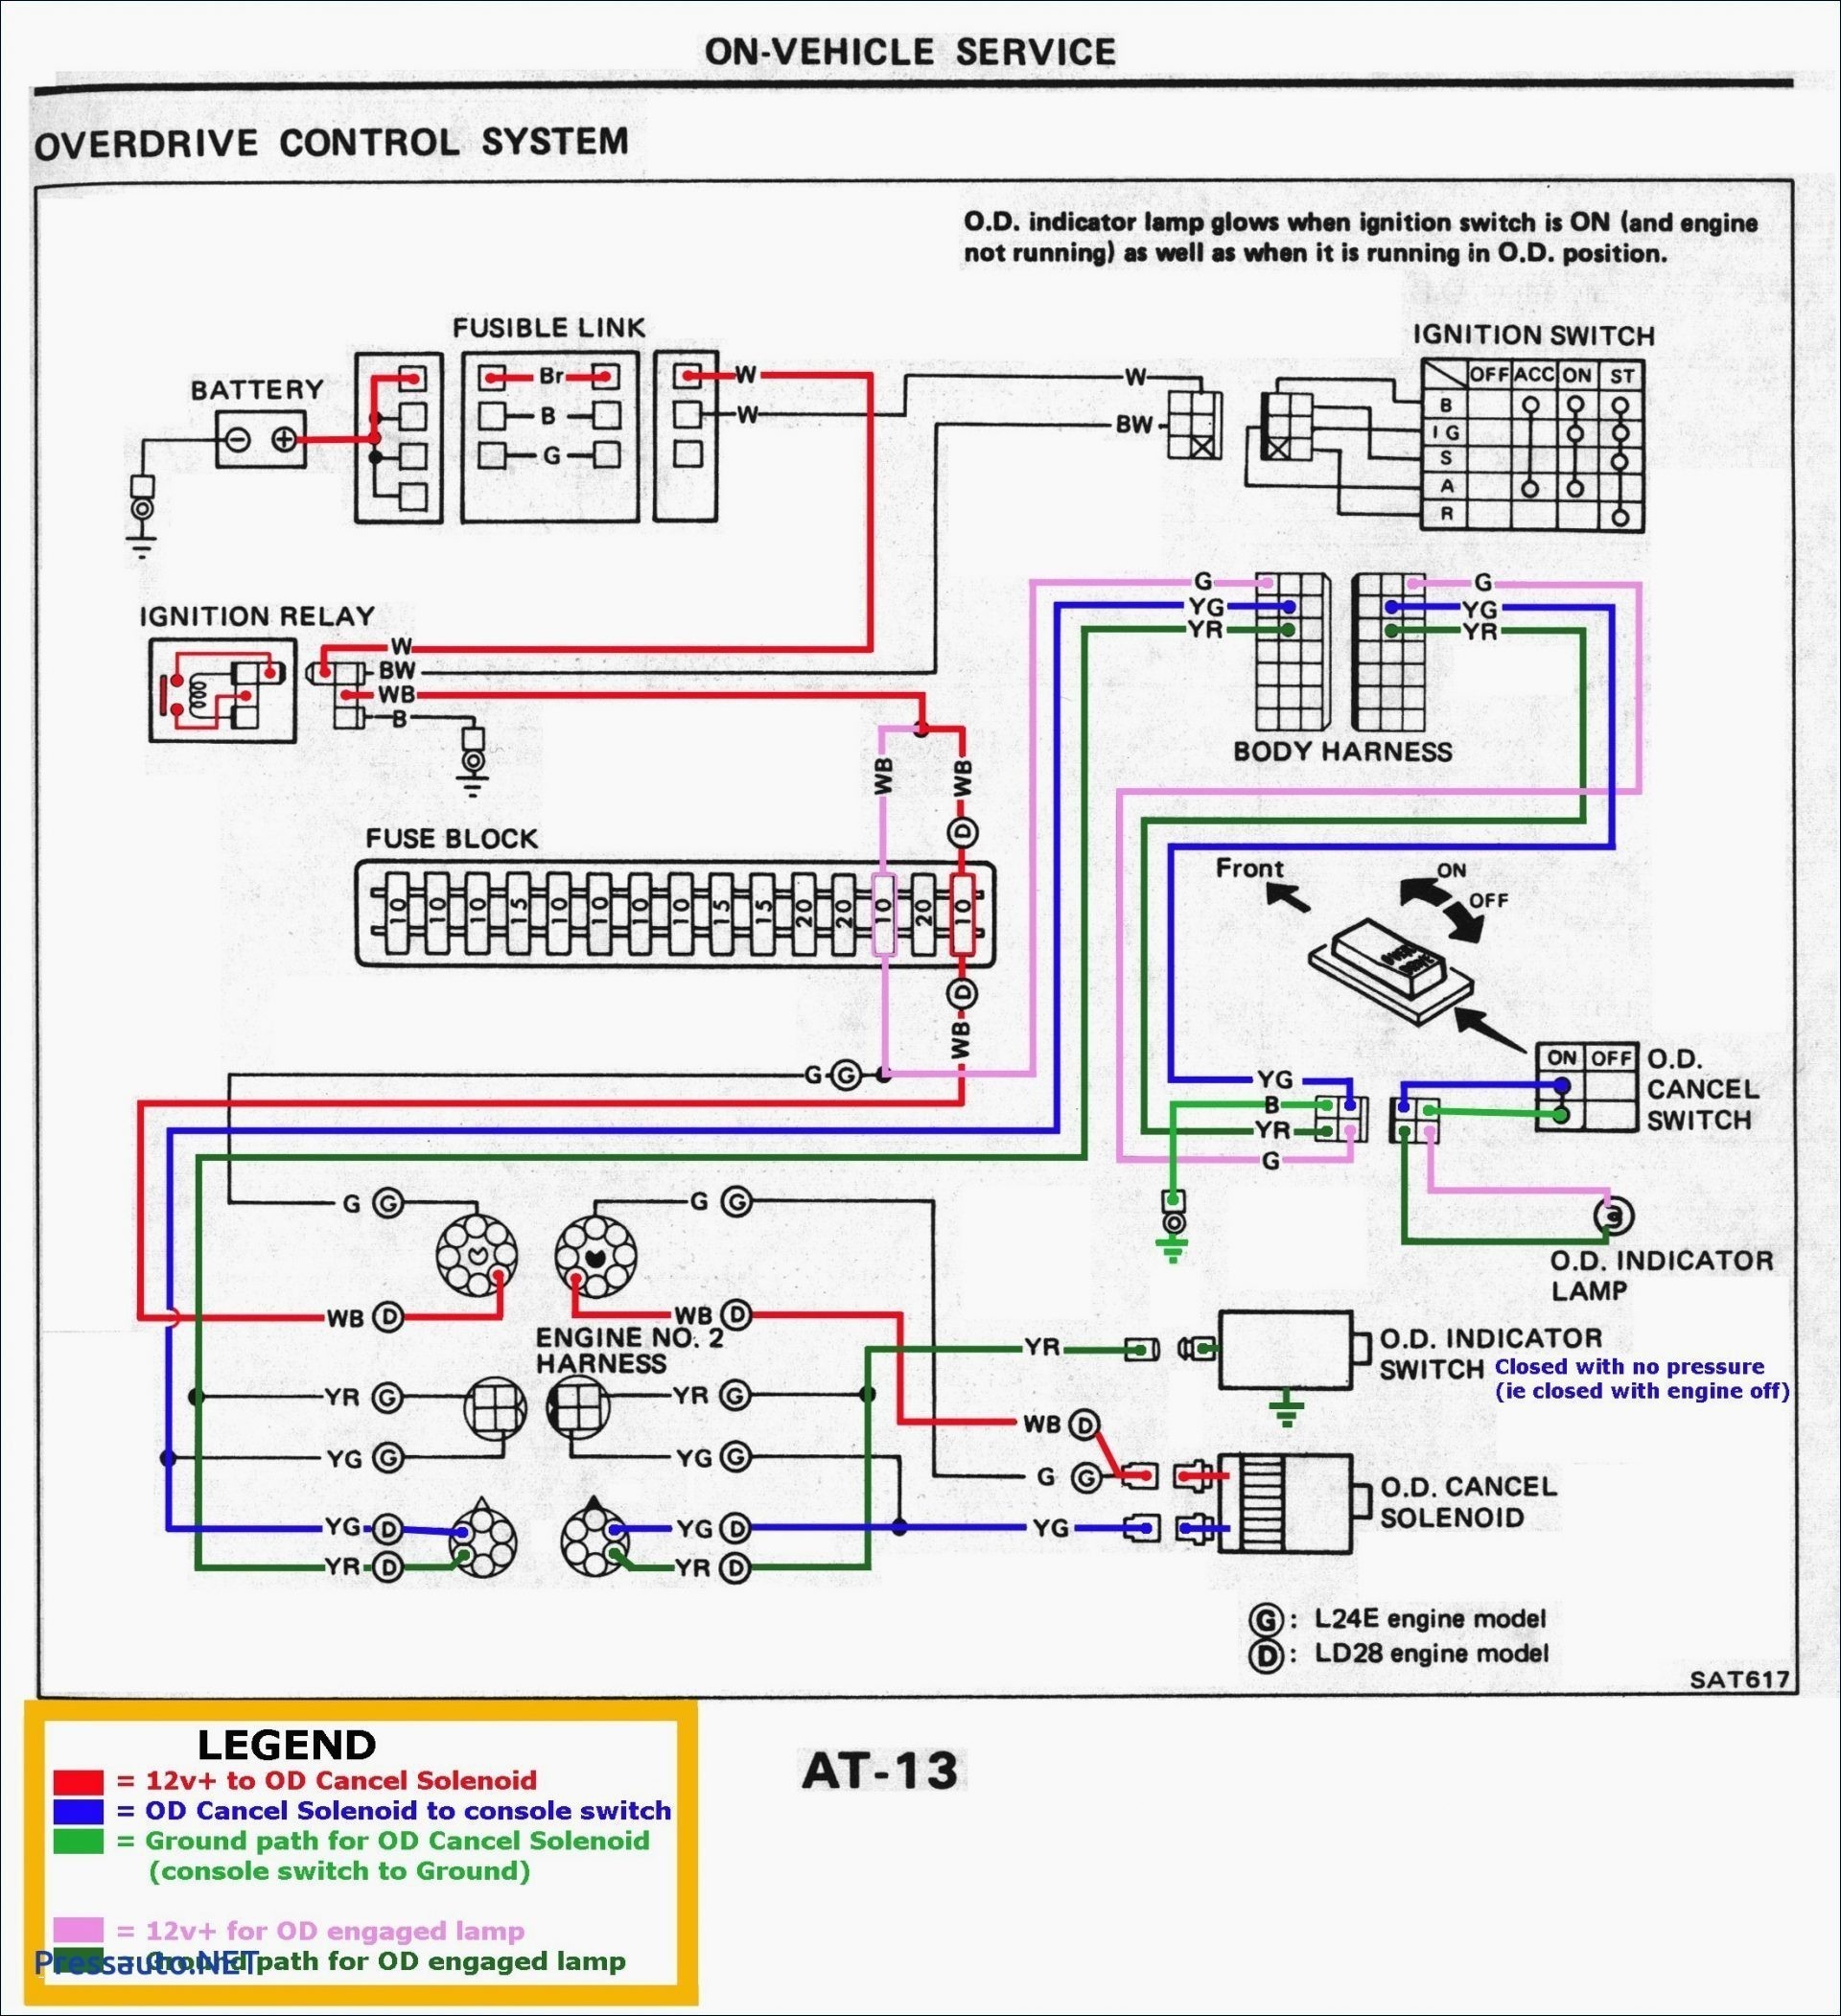 Wiring Diagrams House Circuits New Basic Electrical Wiring Lamp Beautiful About Electrical House Wiring